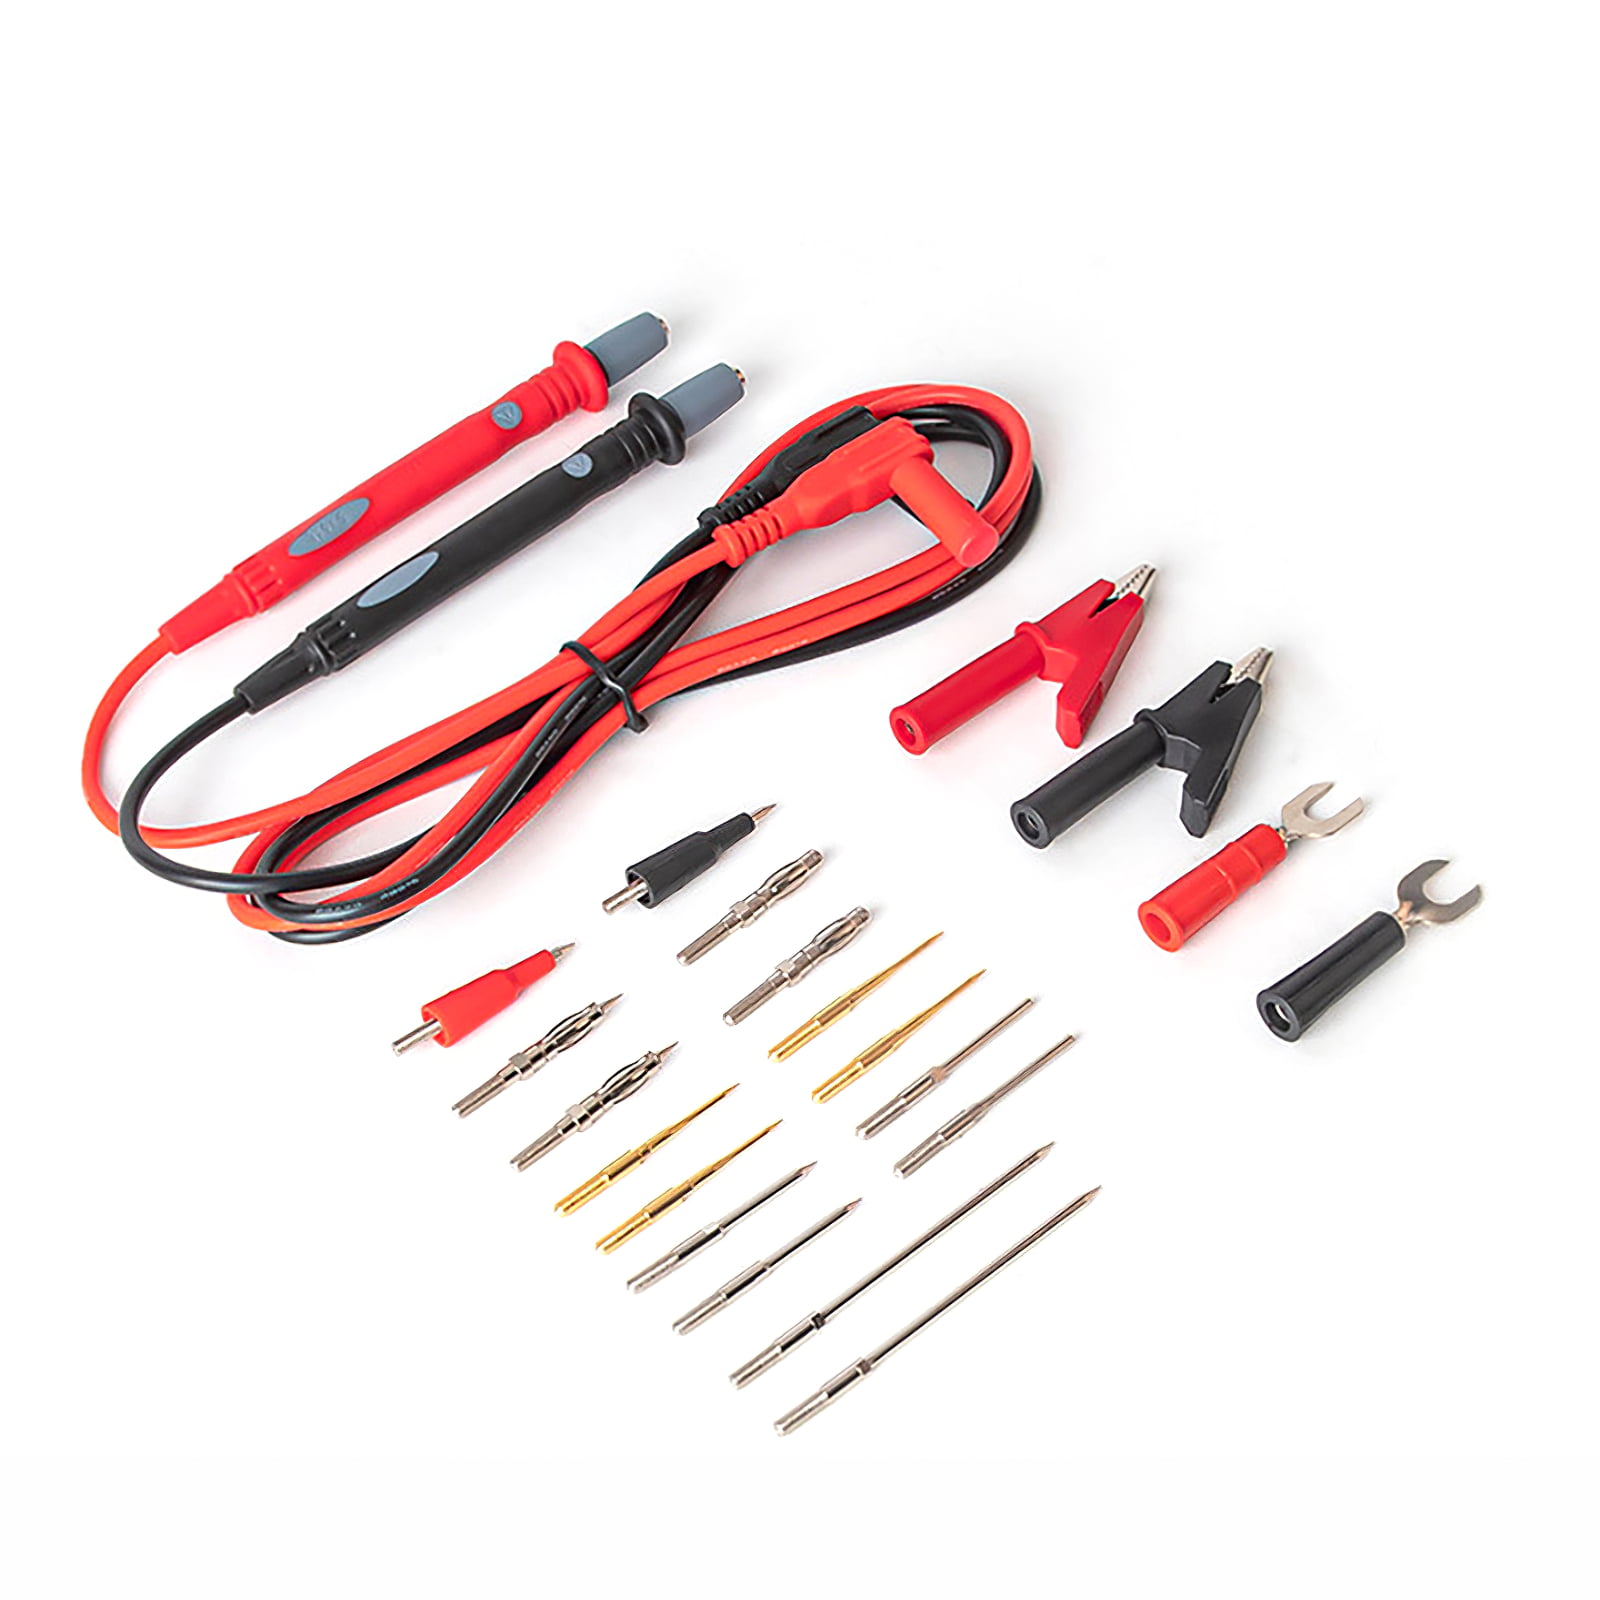 Set Multimeter Test Leads Black/red Probe Electrical Kit Parts Durable 